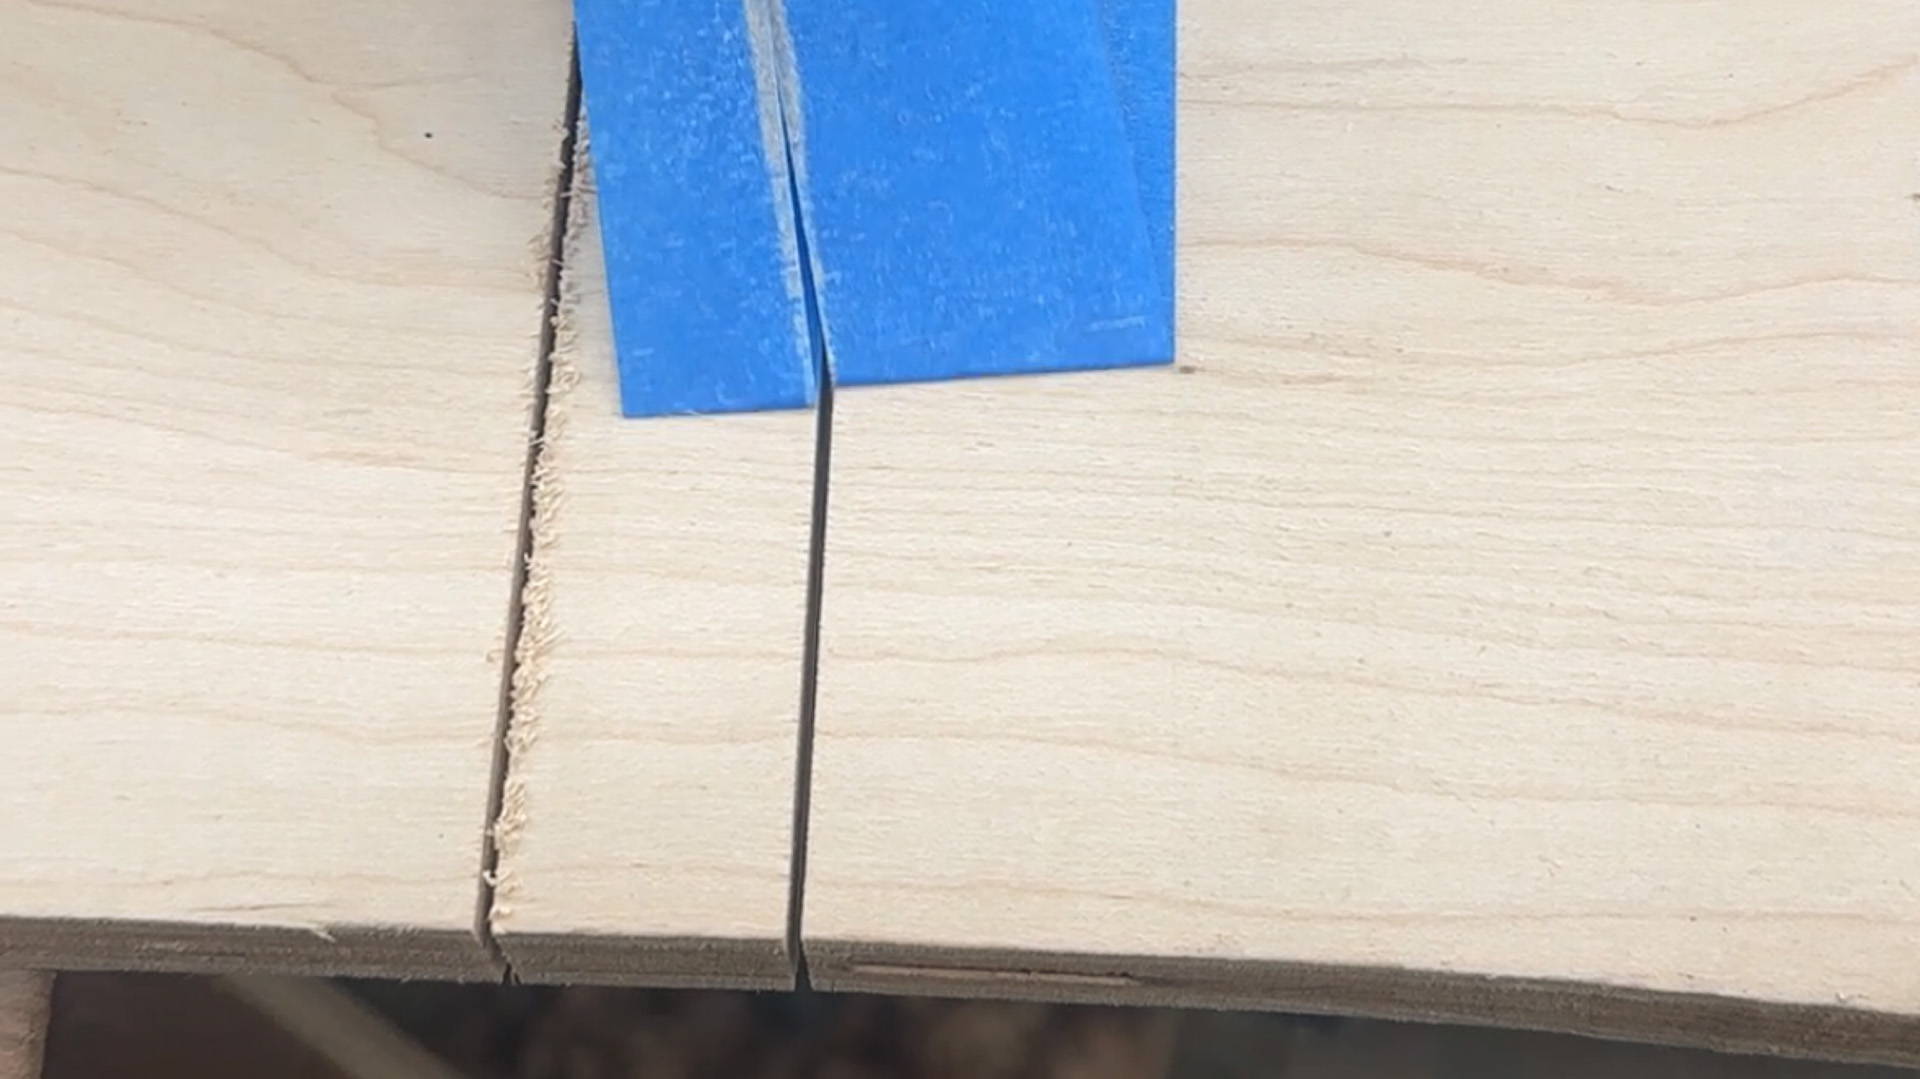 stopping tearout with blue painter's tape